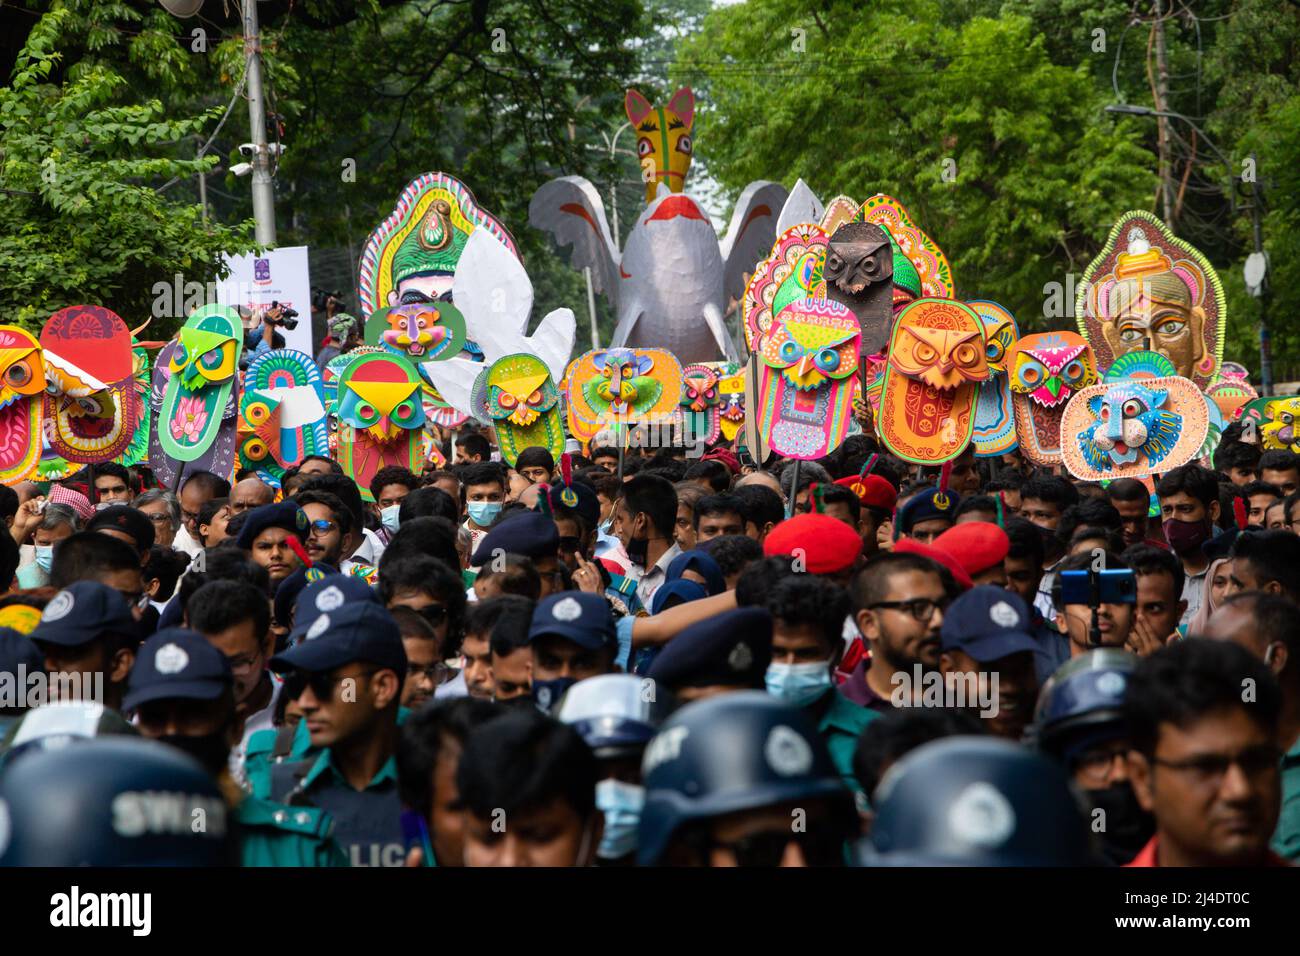 Bangladeshi people take part in a rally (Mangal Shobhajatra) in celebration of the Bengali New Year or 'Pohela Boishakh', the first day of the Bengali new year, in Dhaka, Bangladesh. Wearing colorful clothes, they carry masks and different animal floats down a street to manifest the cultural heritage of Bangladesh during the celebration. The Mangal Shobhajatra has been put on the List of Intangible Cultural Heritage of Humanity. 'Pohela Boishakh' falls every year on April 14 in Bangladesh according to the Bengali calendar or Bangla calendar. The day is celebrated across the country while the U Stock Photo